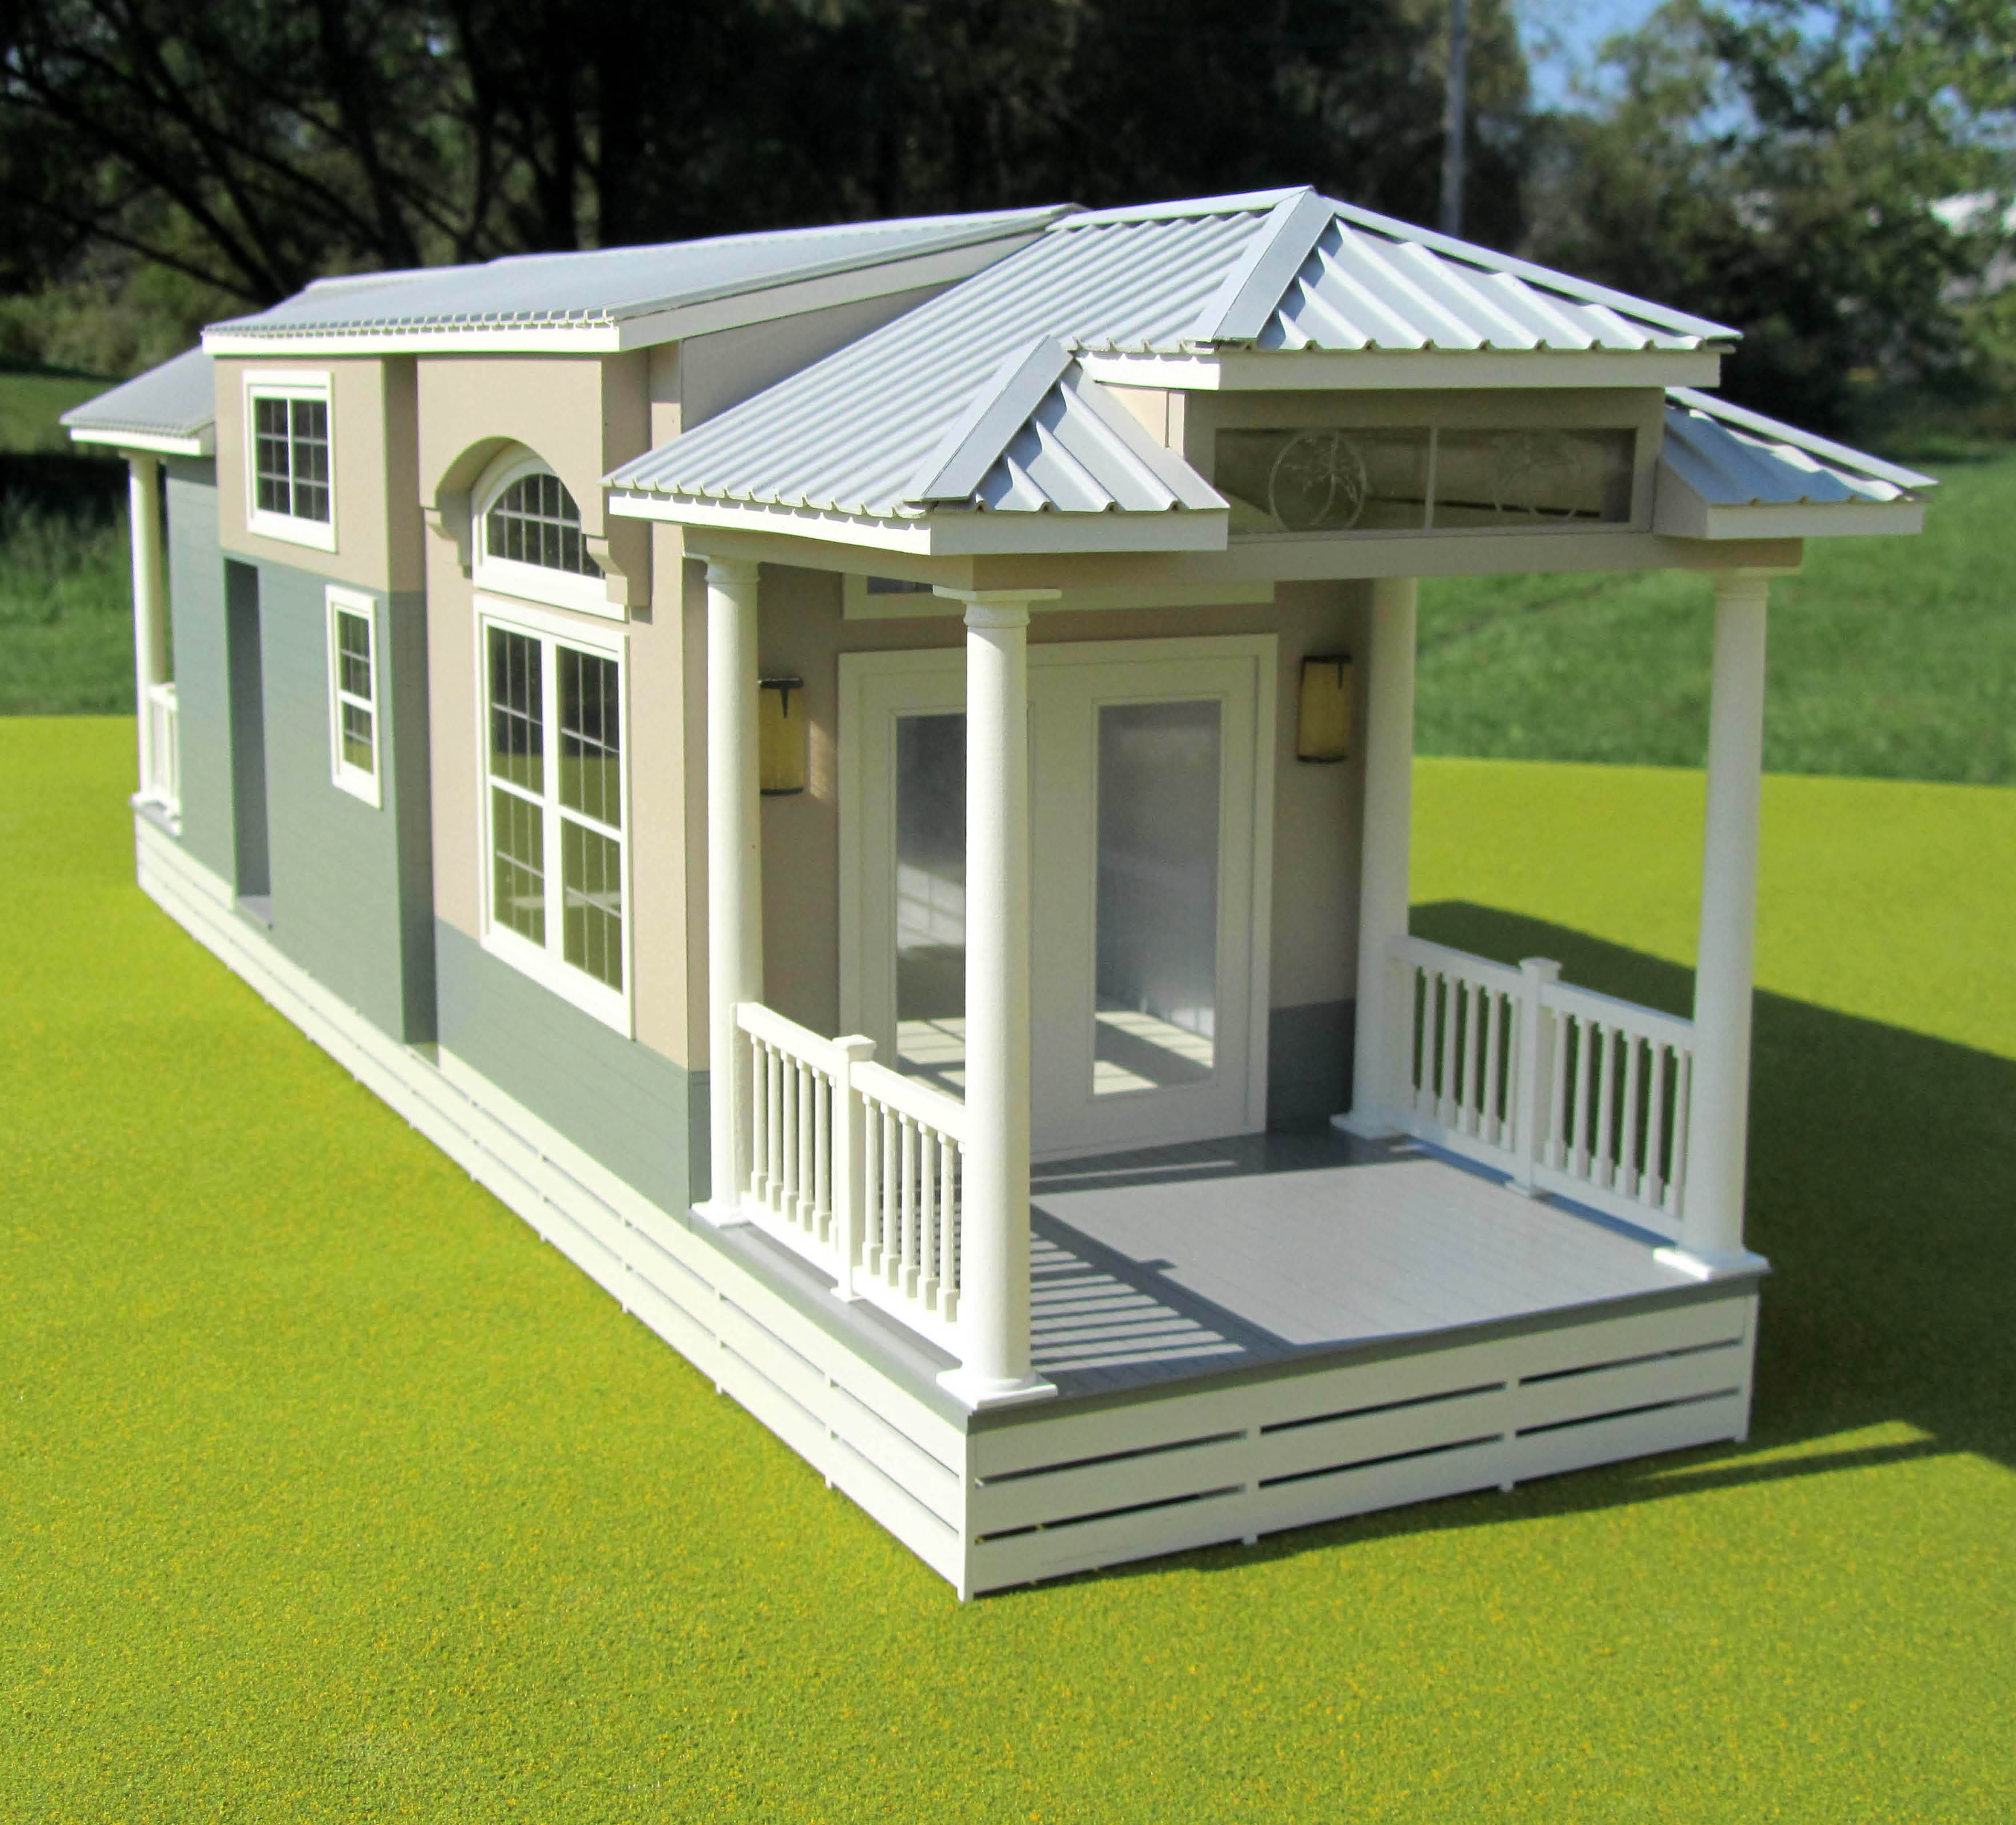 House Model Used As TV Prop For